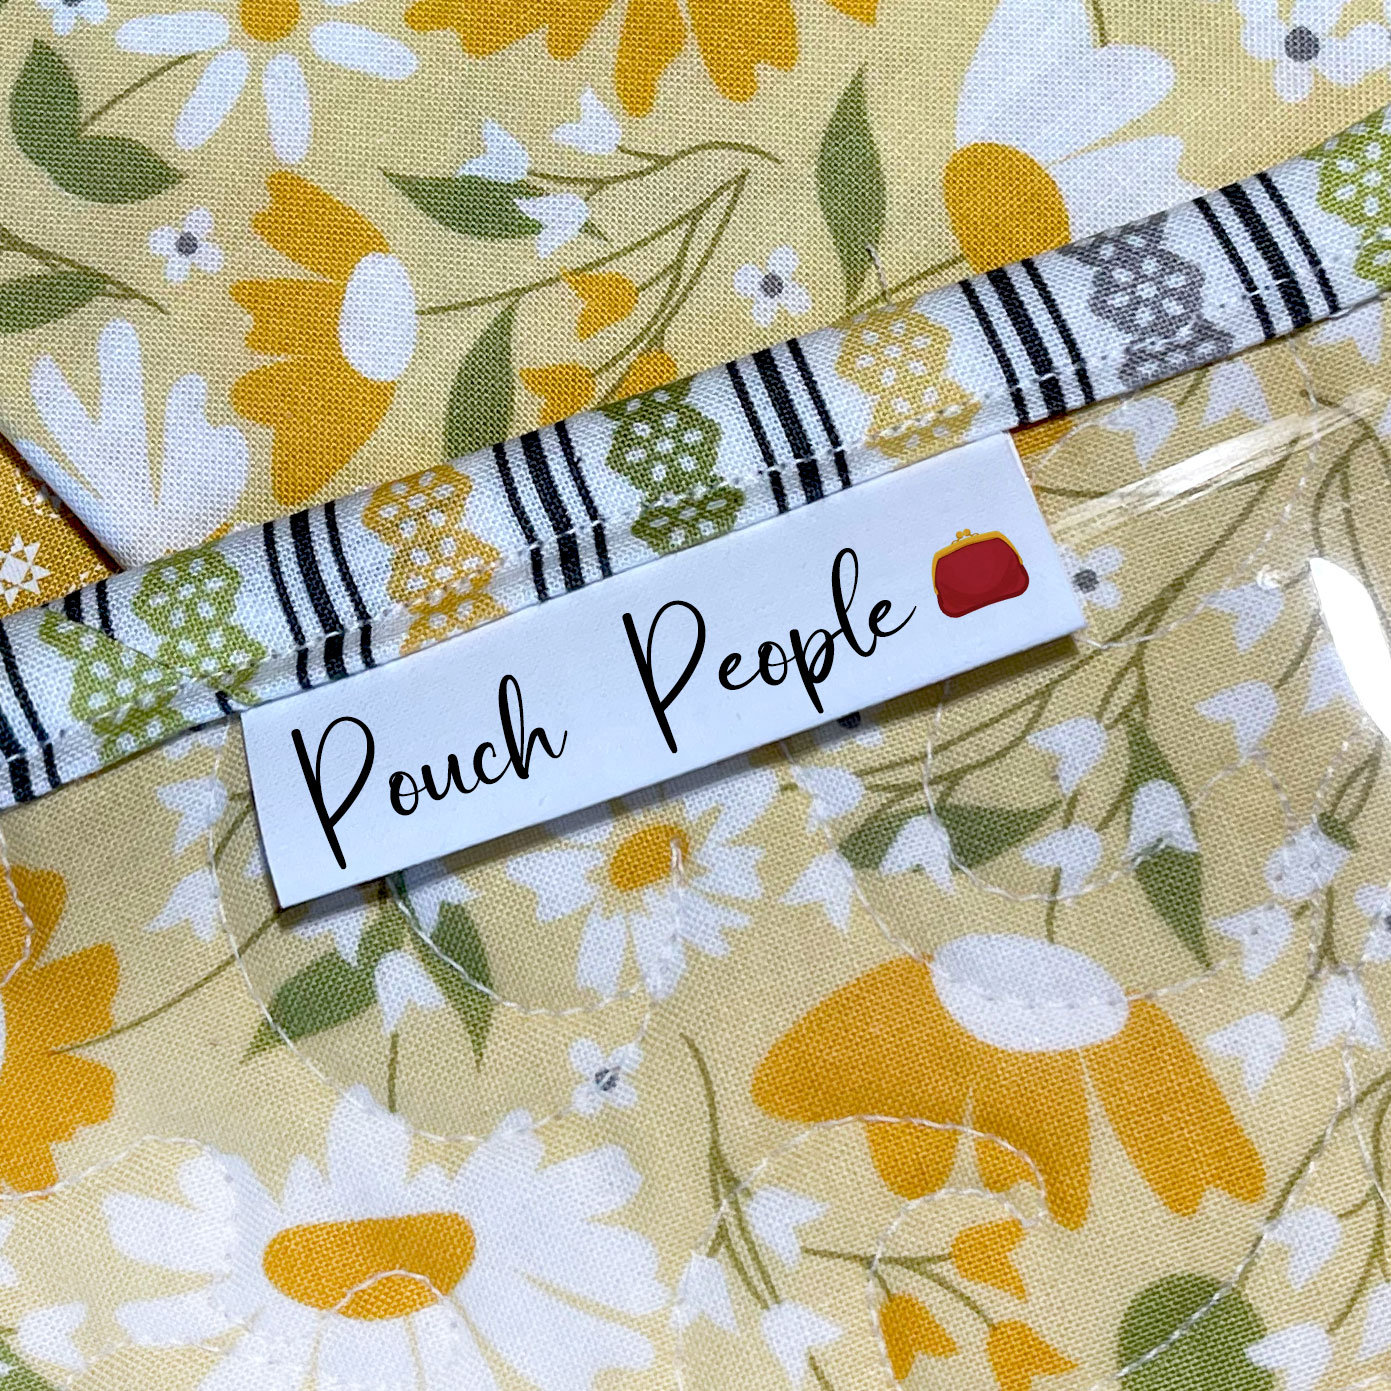 Custom Fabric Name Labels - 20 Frayproof Labels With One or Two